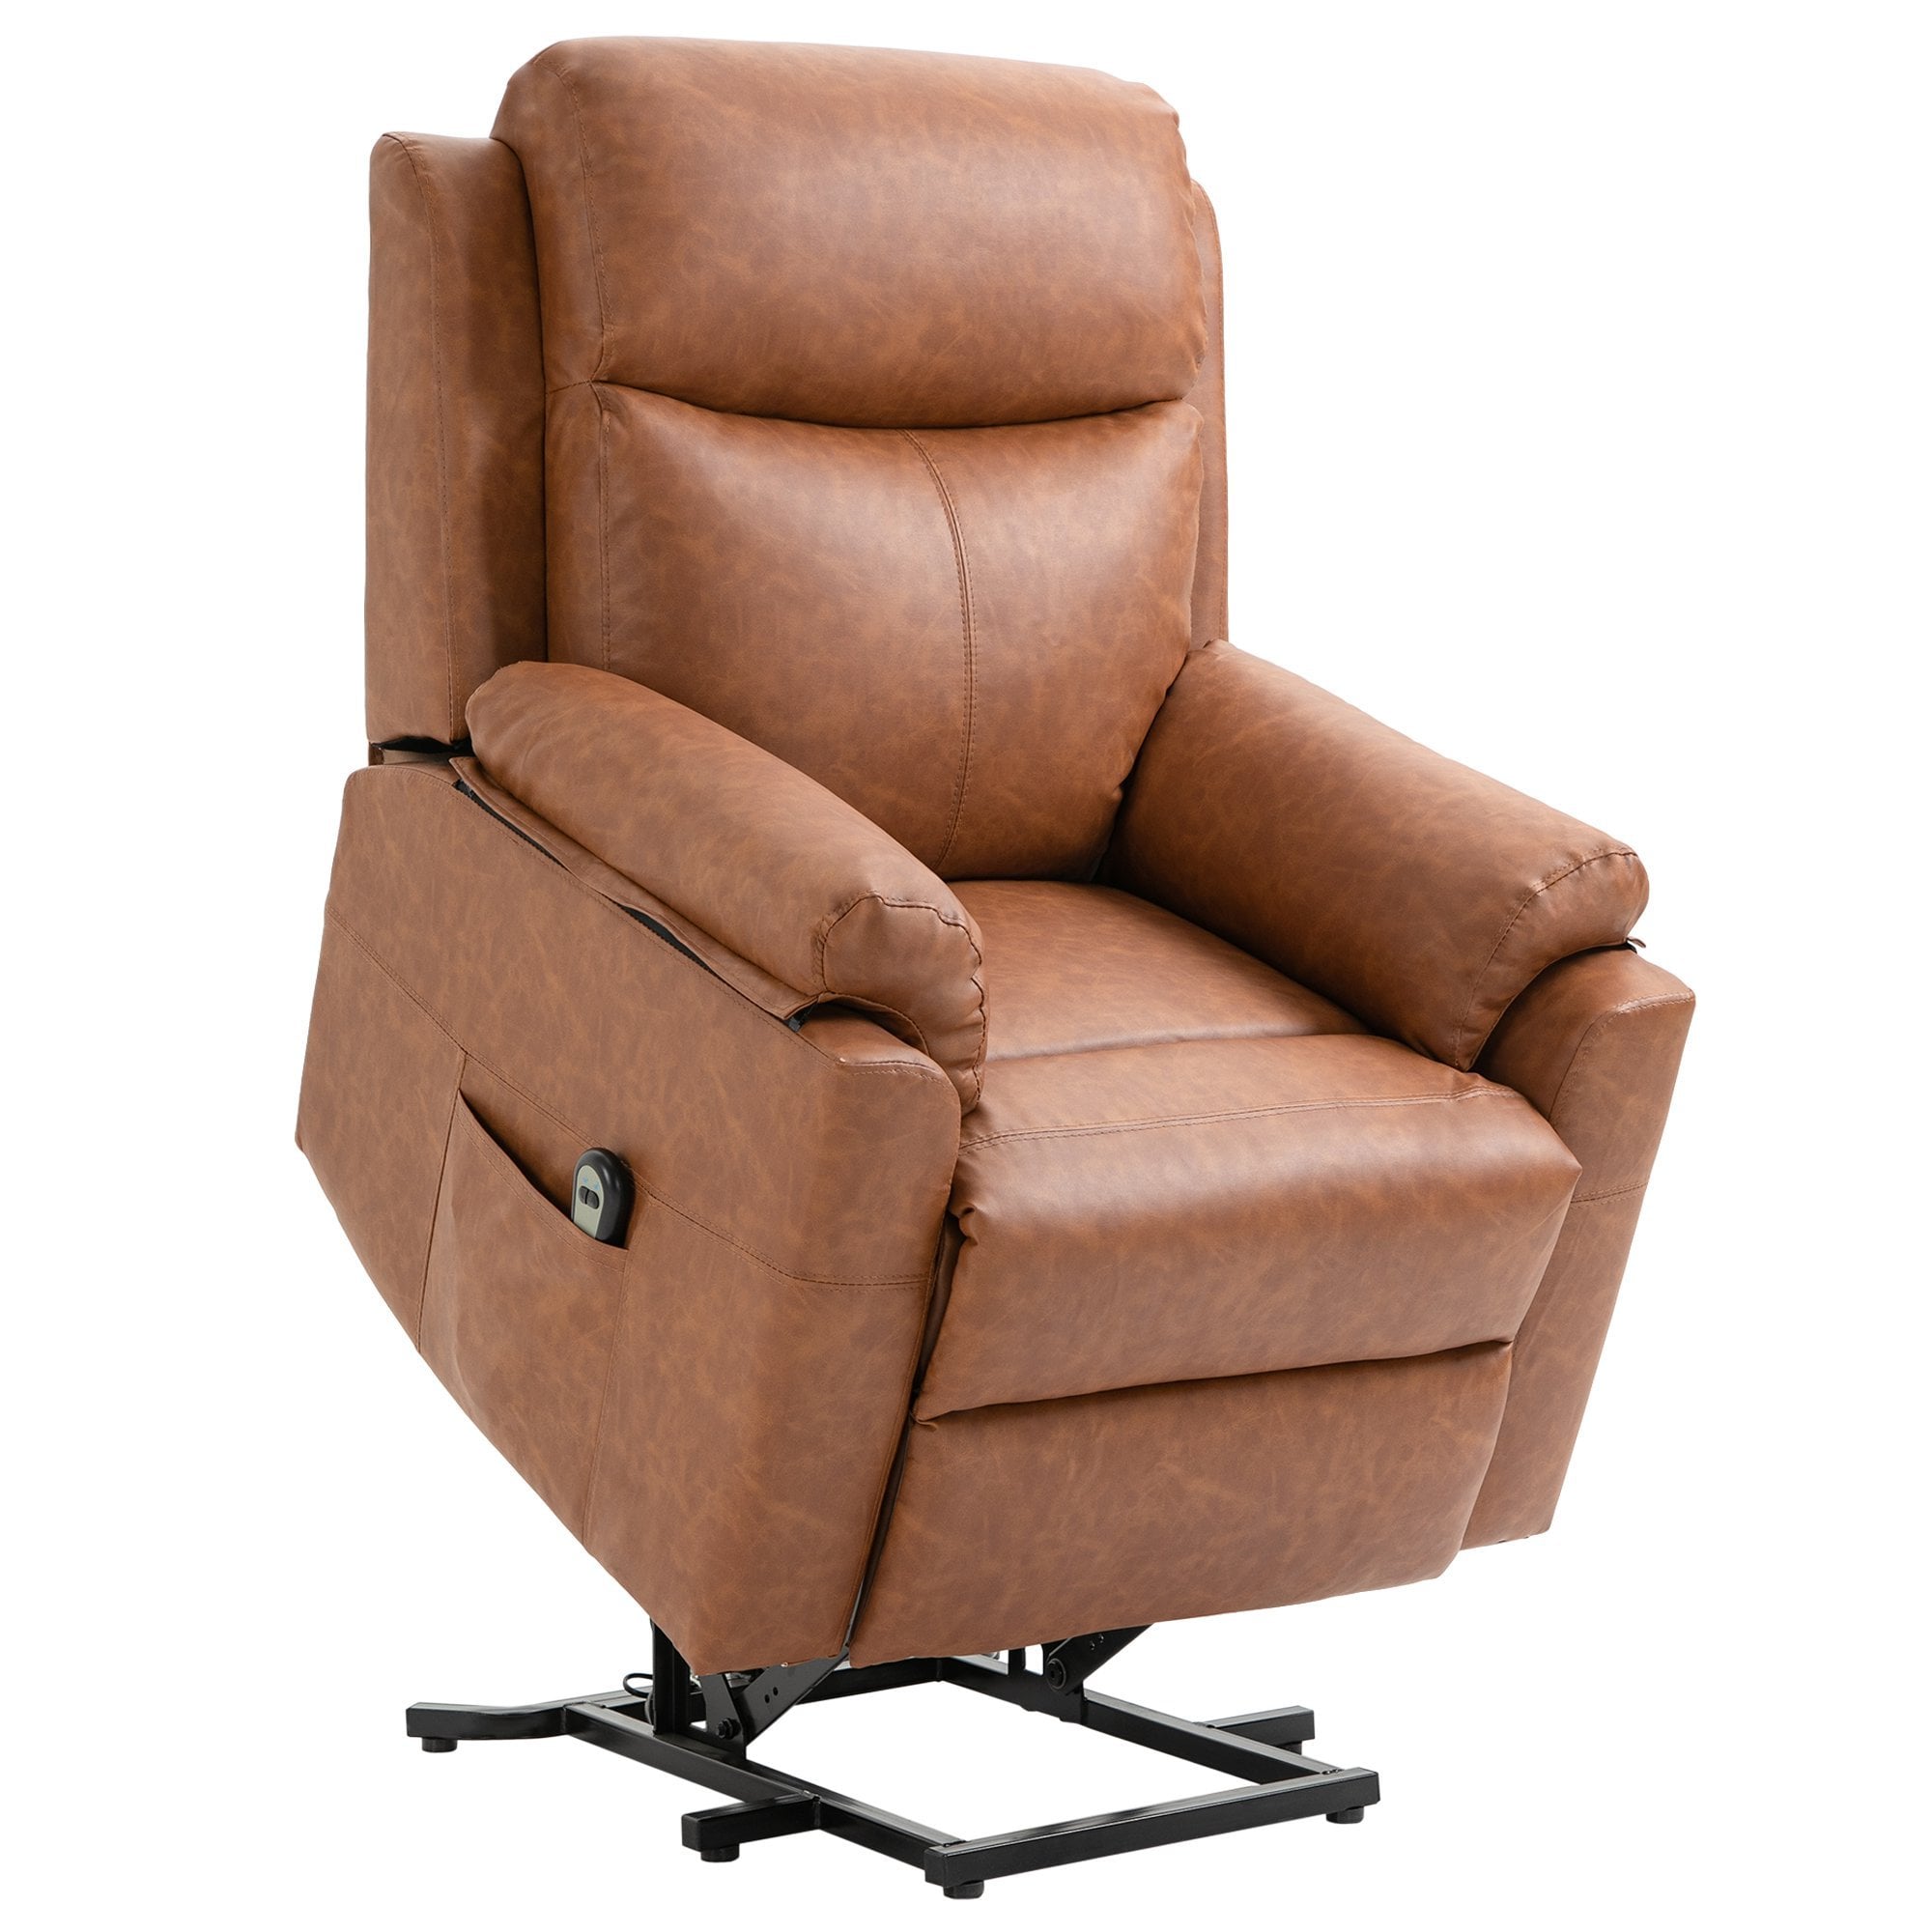 Power Lift Chair Electric Riser Recliner for Elderly - Faux Leather Sofa Lounge Armchair with Remote Control and Side Pocket - Brown - TJ Hughes